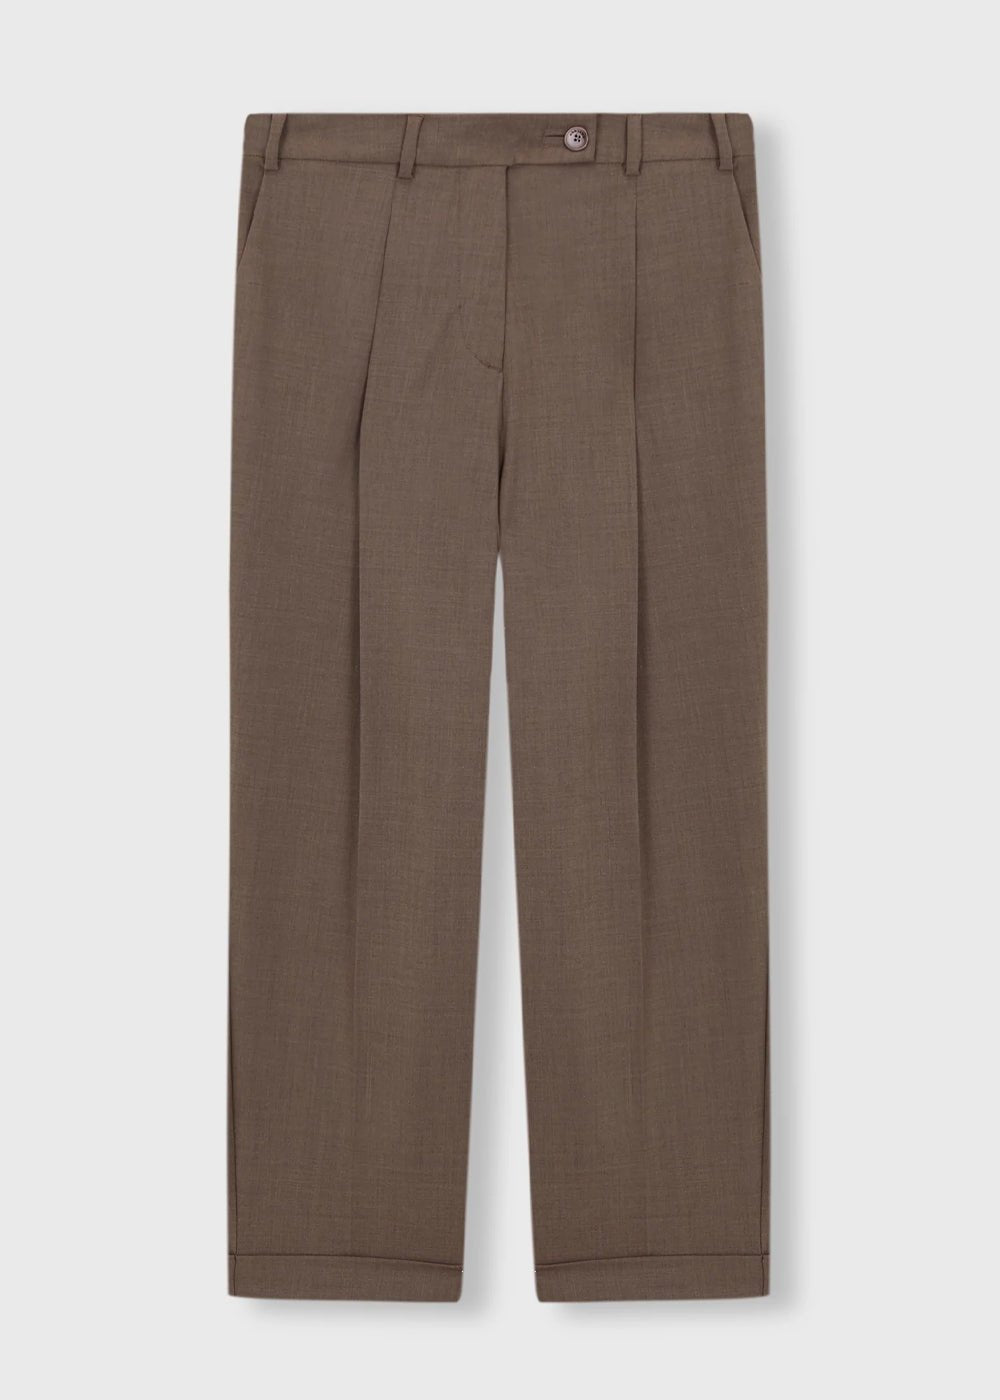 Tailored Masculine Pants in Vetiver by CORDERA – New Classics Studios